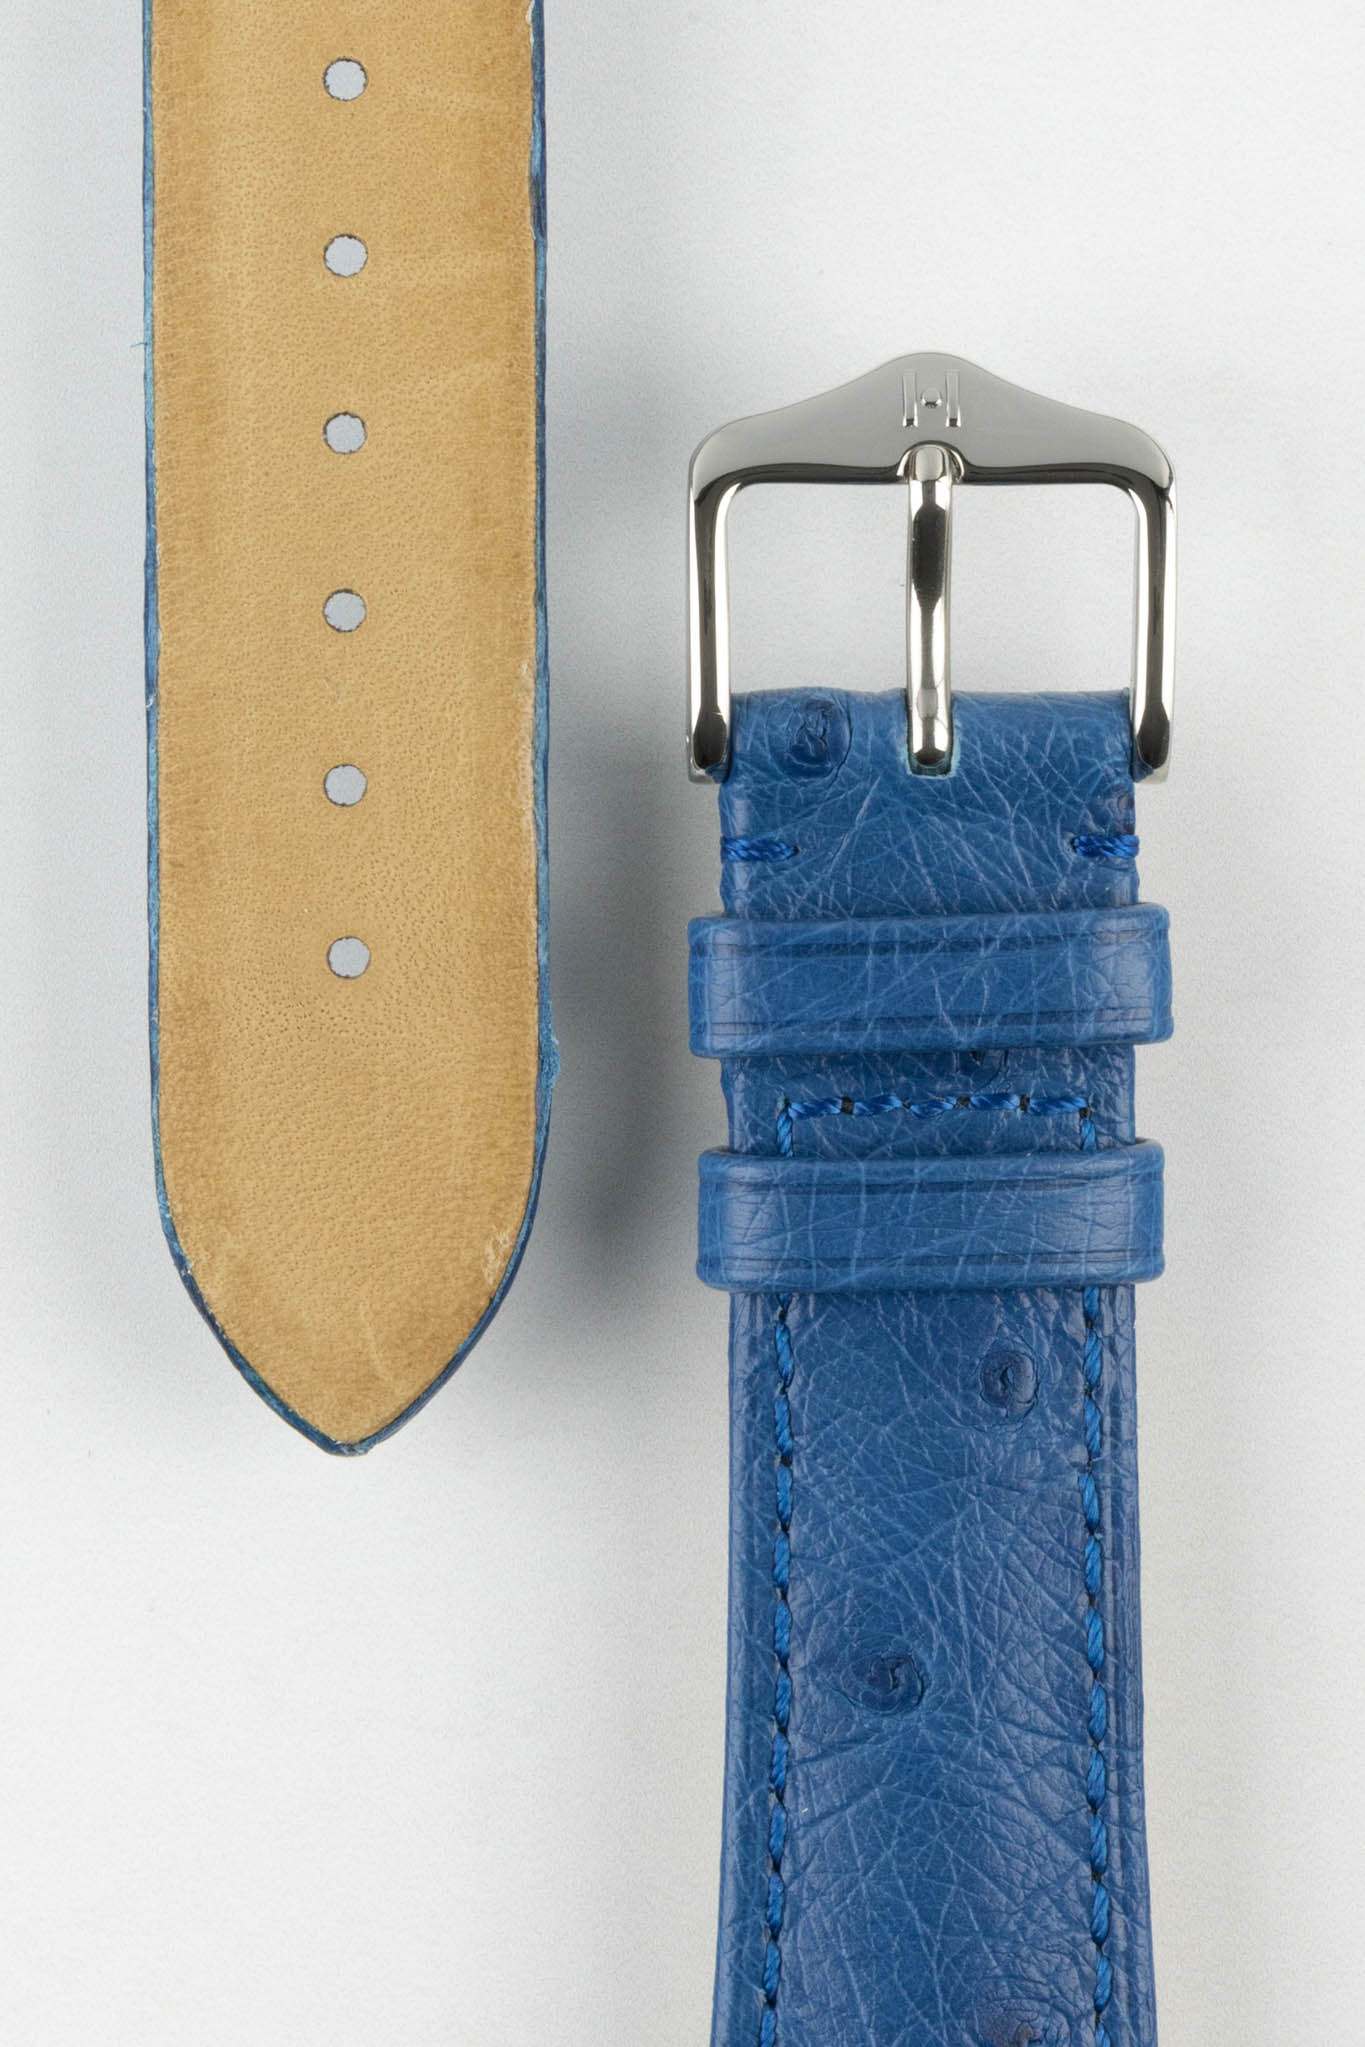 vinacreations Blue Genuine Ostrich Watch Strap Quick Release DH-184, 18mm/16mm / Regular Length (125mm-75mm)